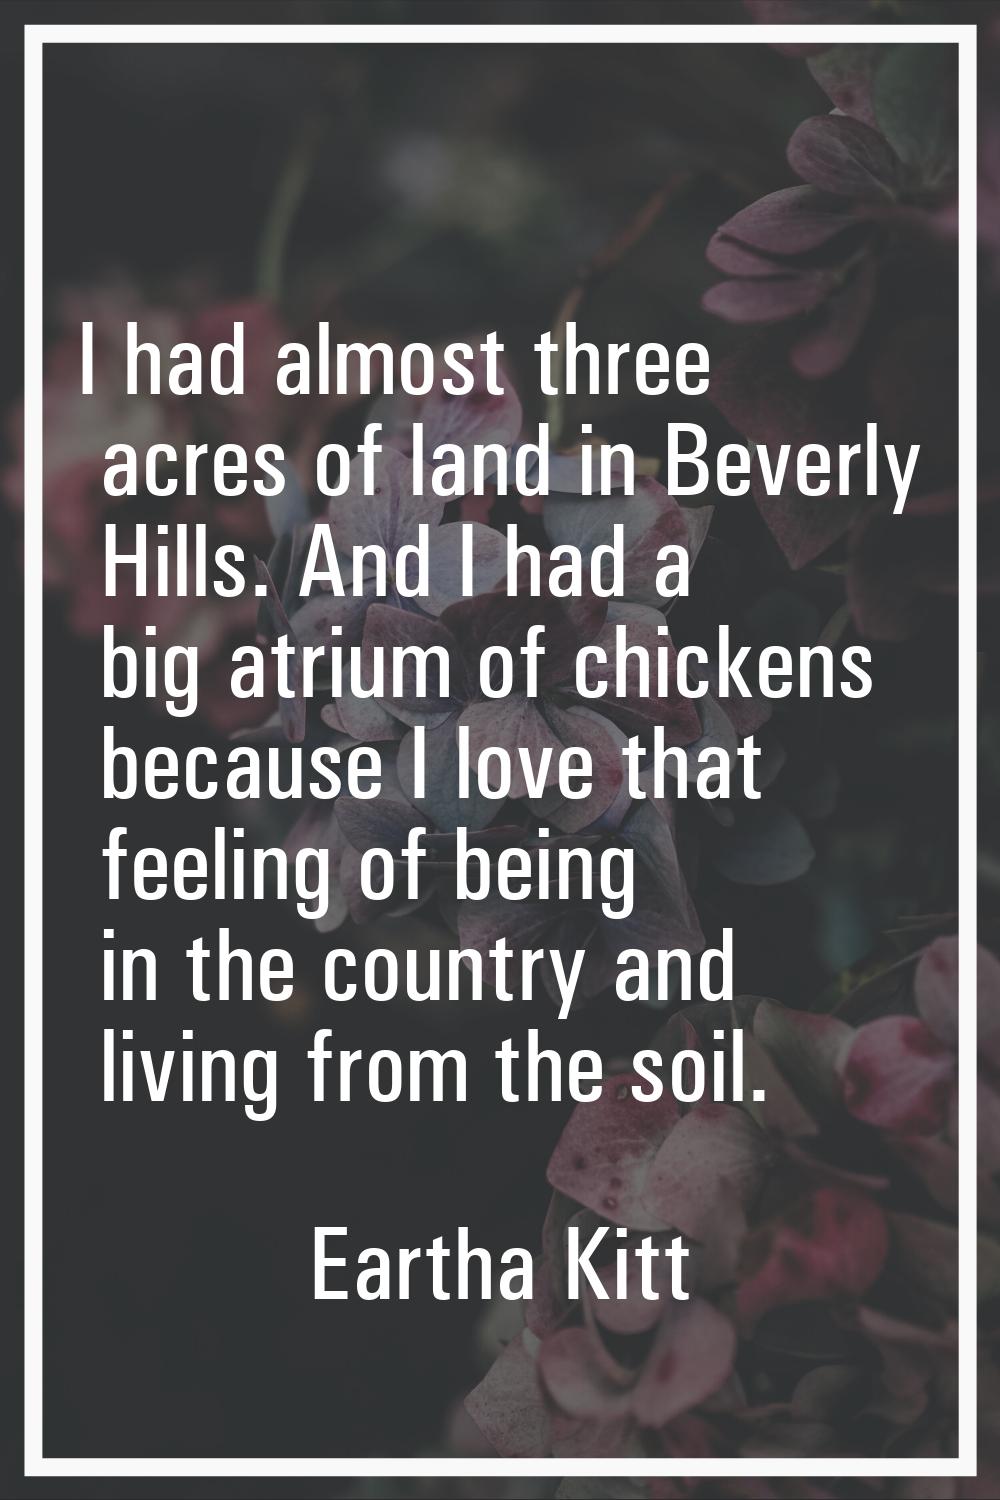 I had almost three acres of land in Beverly Hills. And I had a big atrium of chickens because I lov